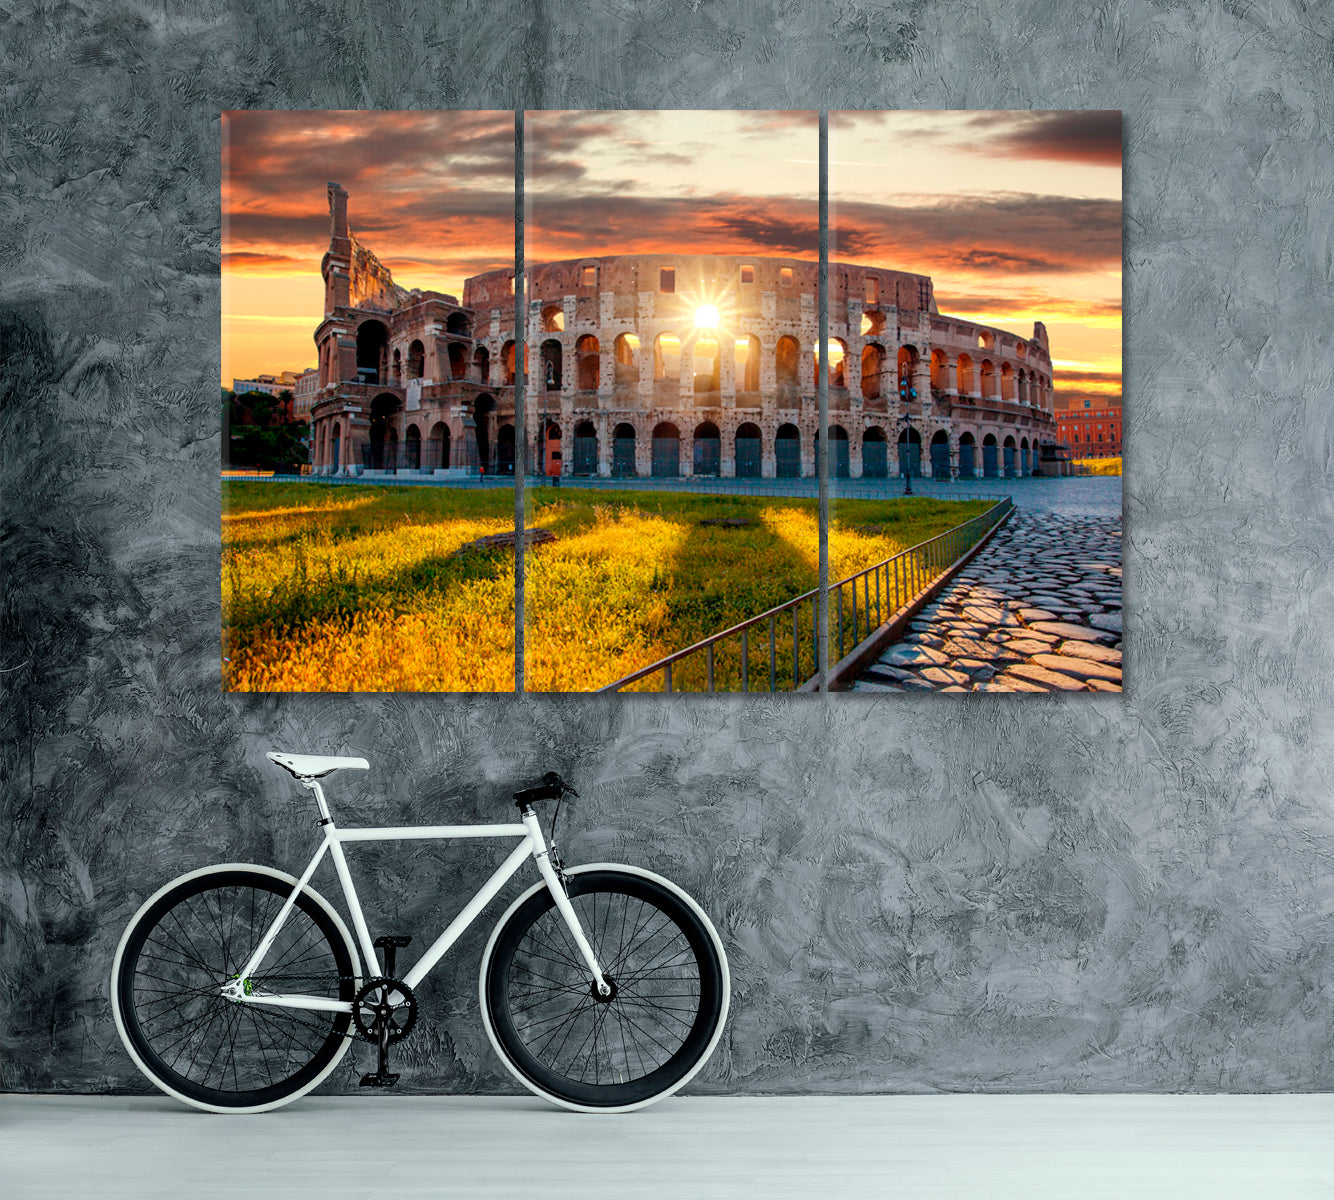 Colosseum at Beautiful Sunset Rome Italy Canvas Print ArtLexy 3 Panels 36"x24" inches 